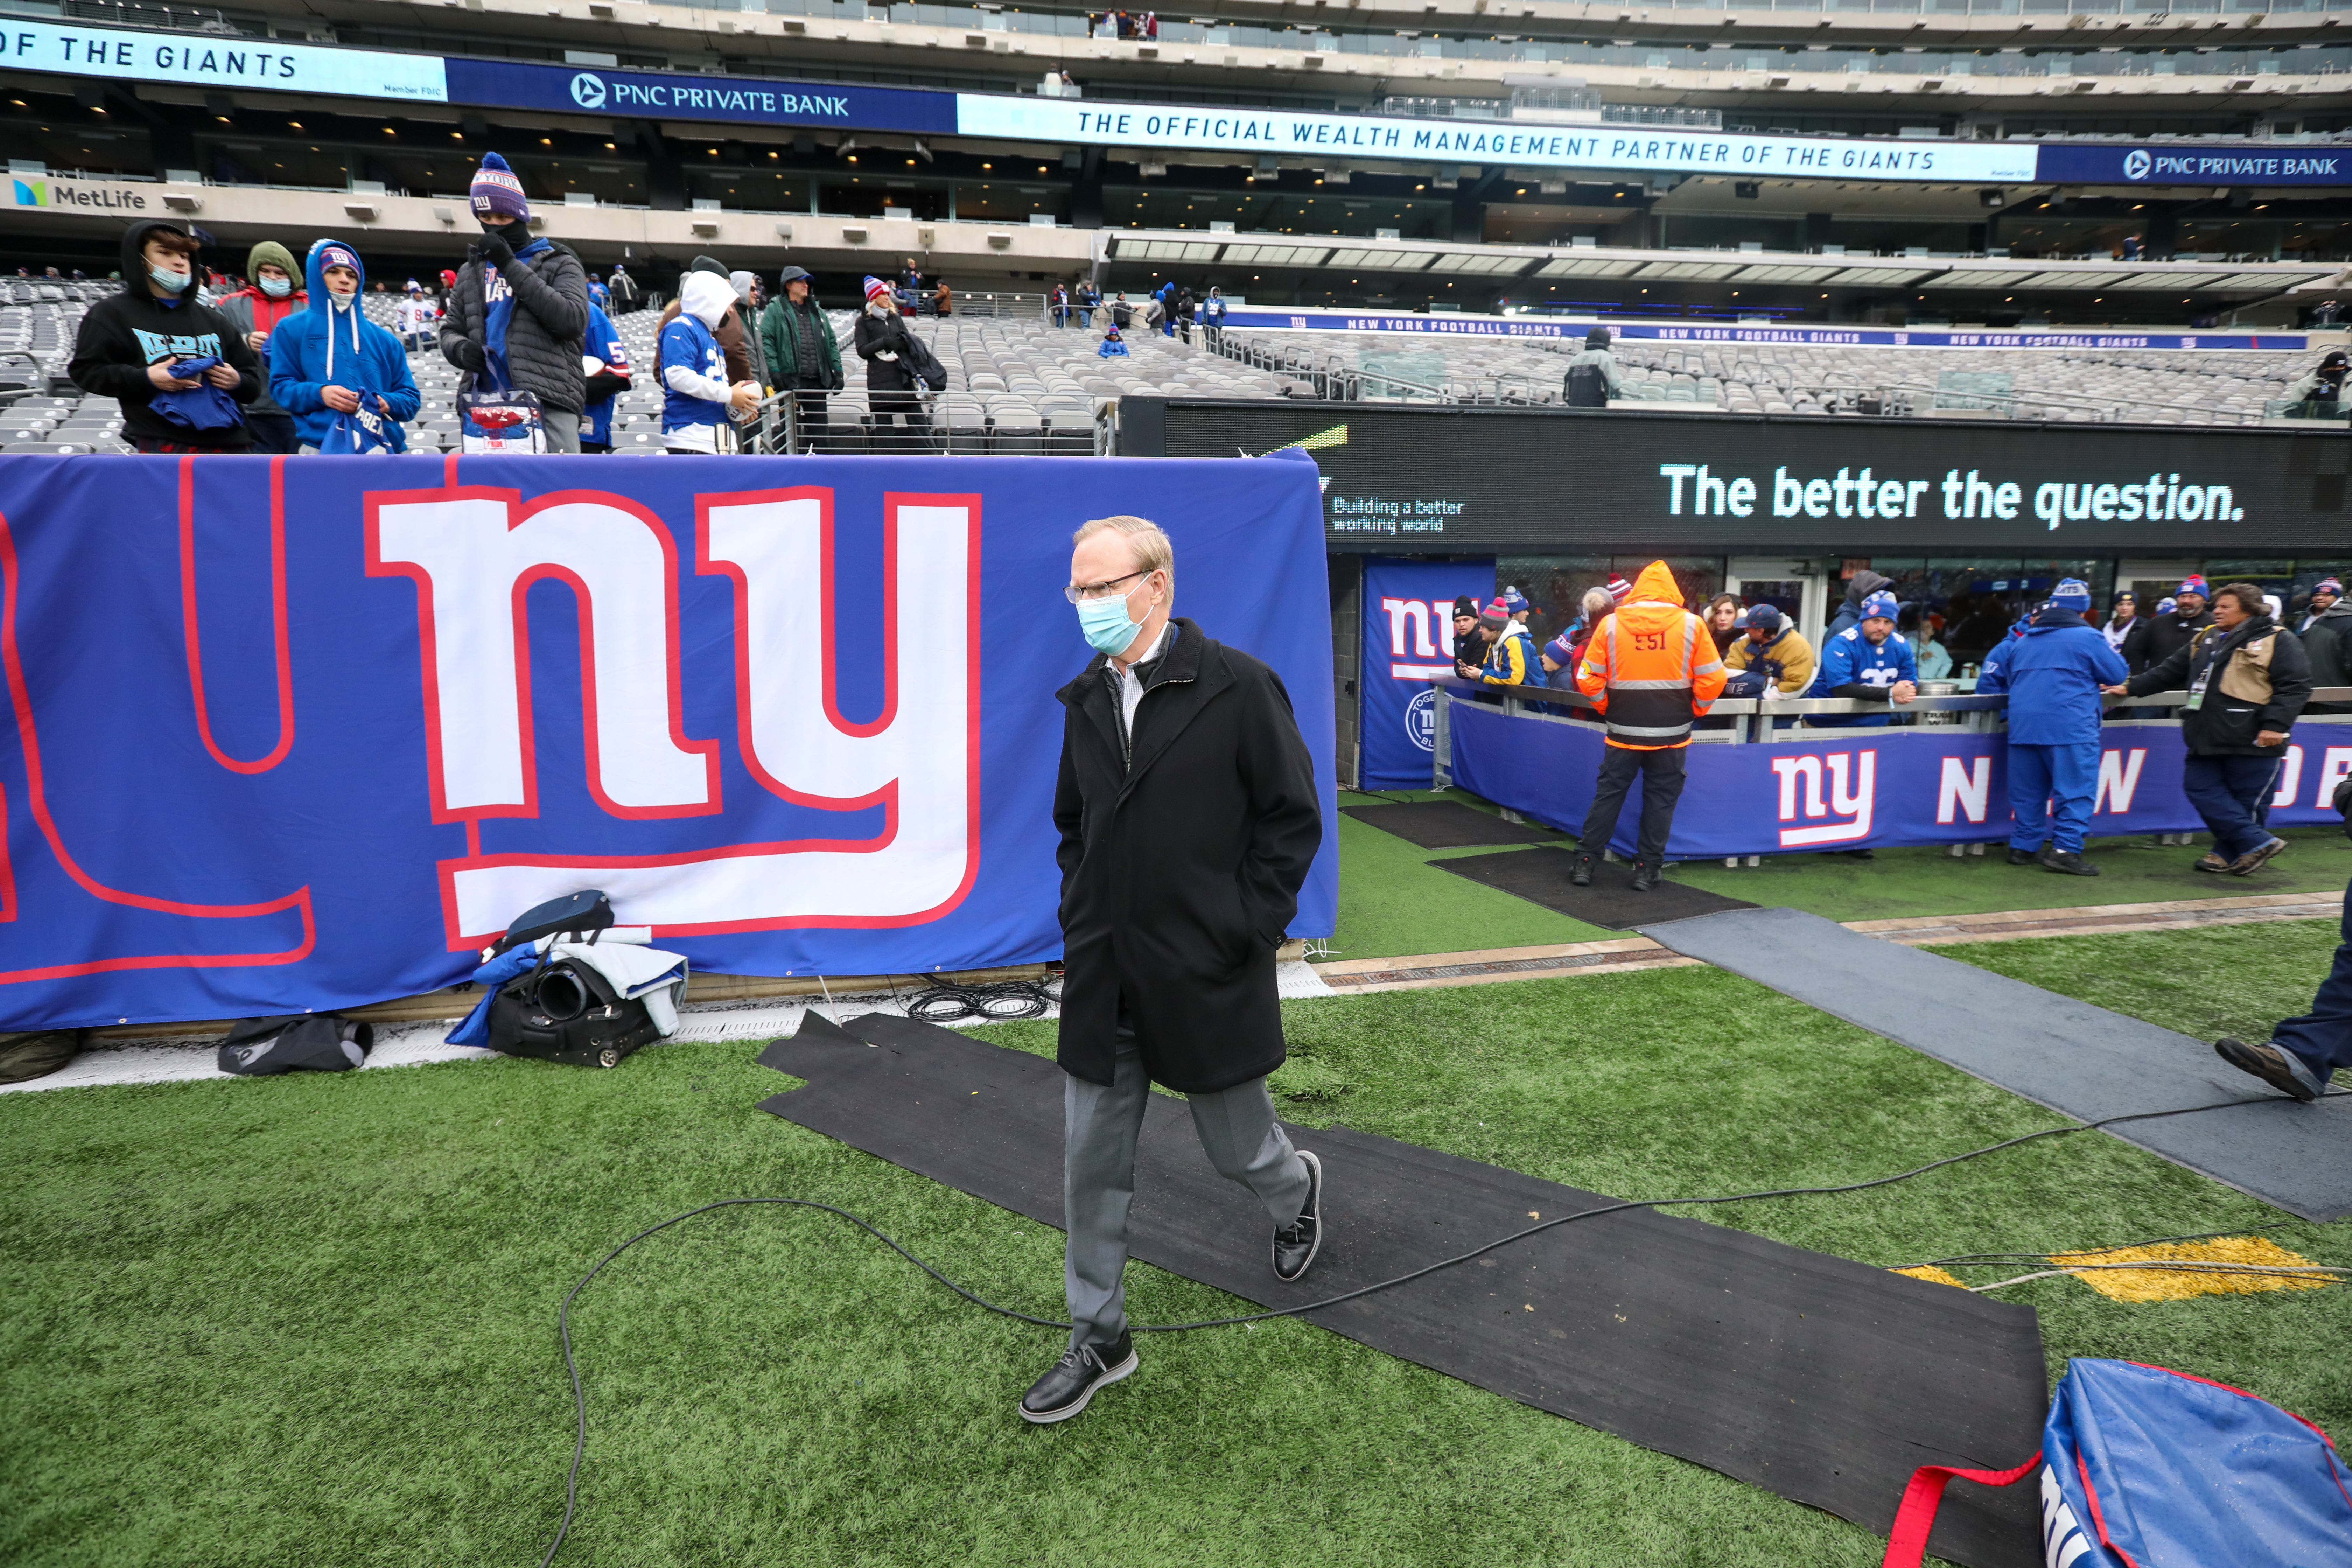 New York Giants owner John Mara walks on the sideline during pregame warmups as the Giants prepare to host the Washington Football Team on Sunday, Jan. 9, 2022 in East Rutherford, N.J.